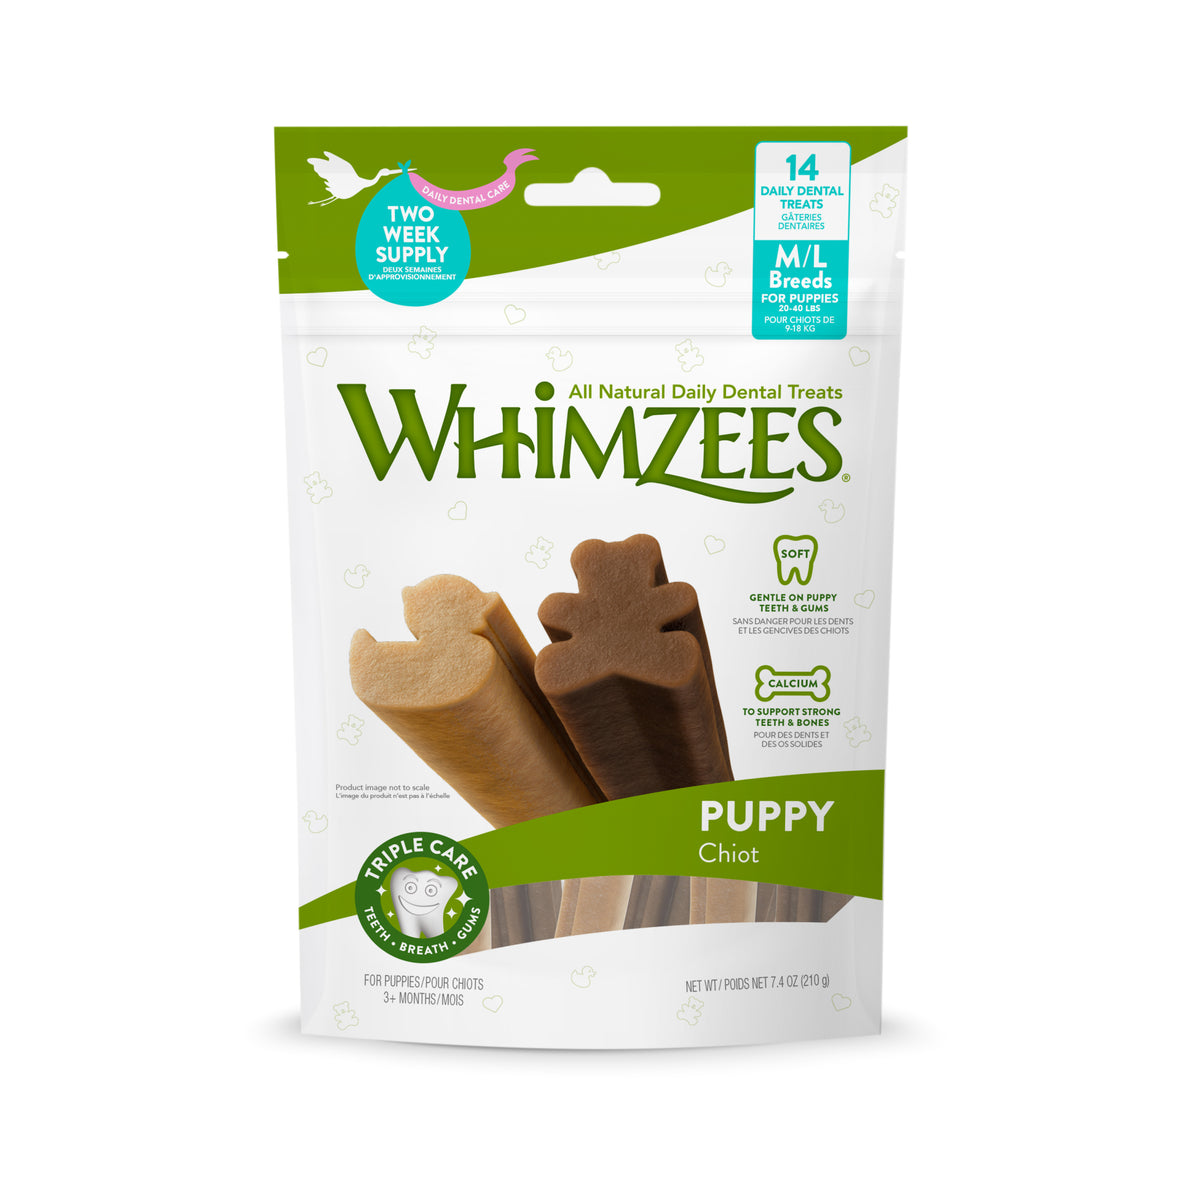 Whimzees All Natural Daily Dental Treats  for Puppies - Value Bag